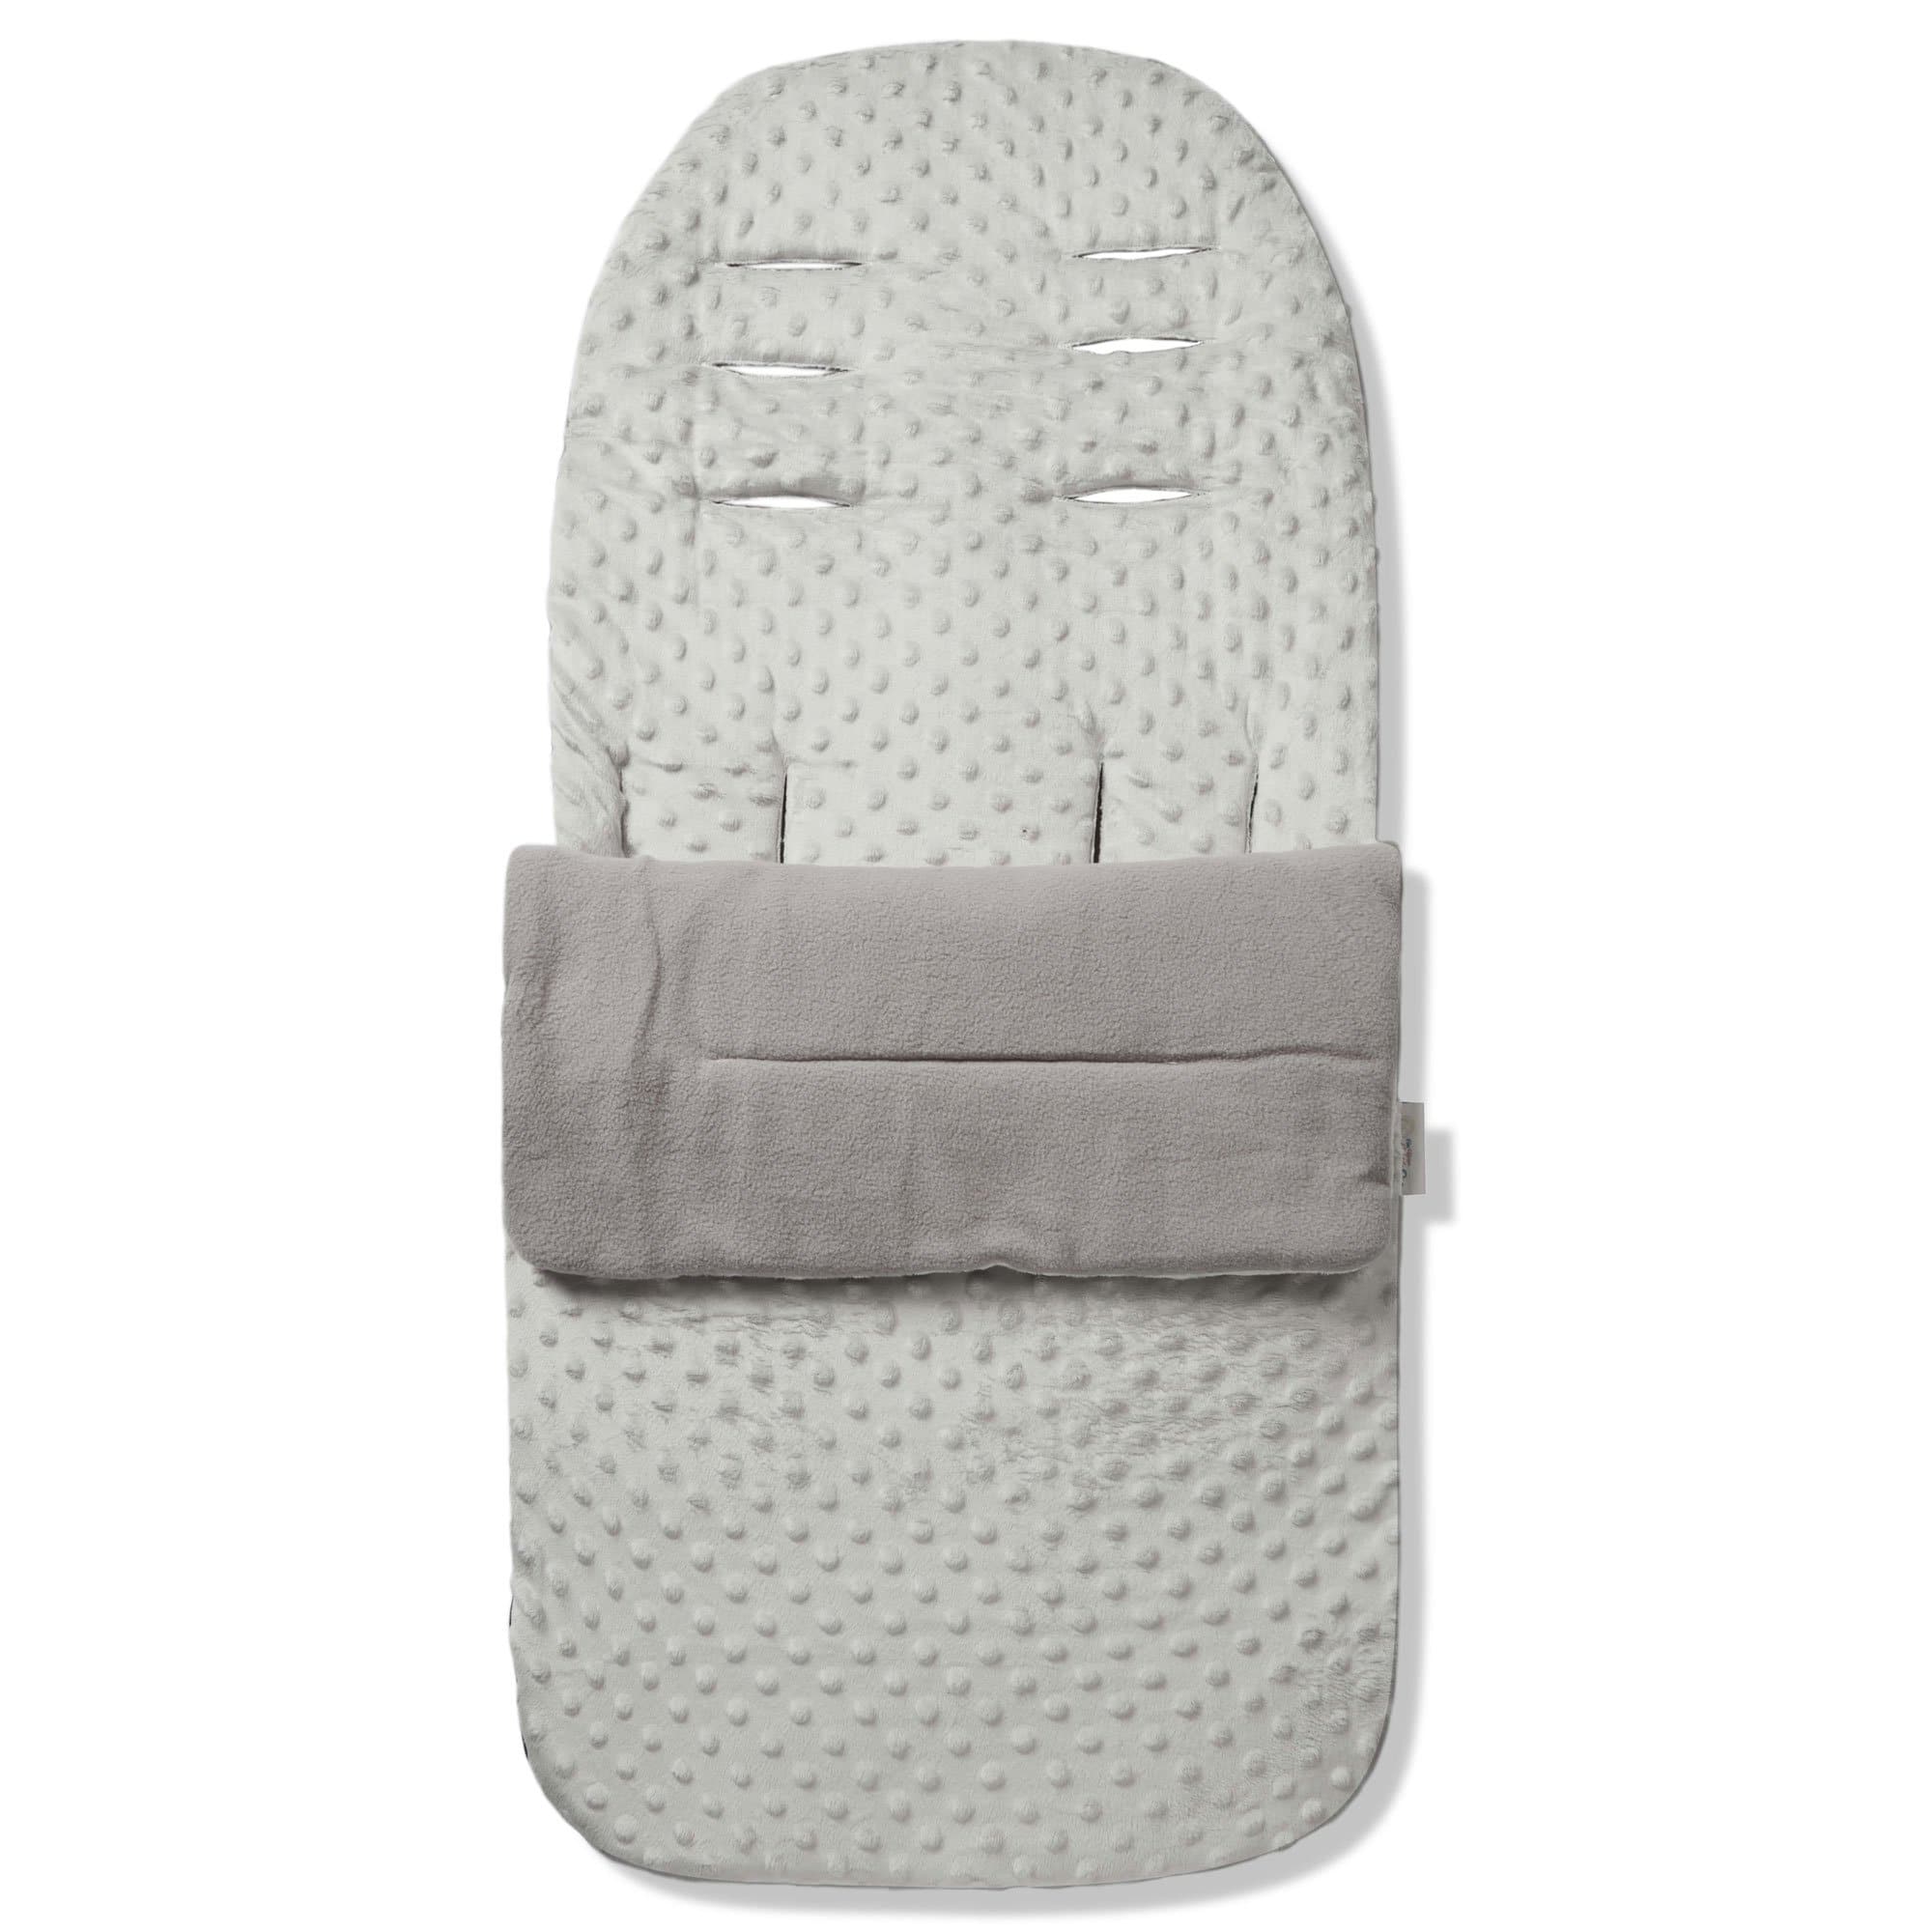 Dimple Footmuff / Cosy Toes Compatible with Babylo - Grey / Fits All Models | For Your Little One